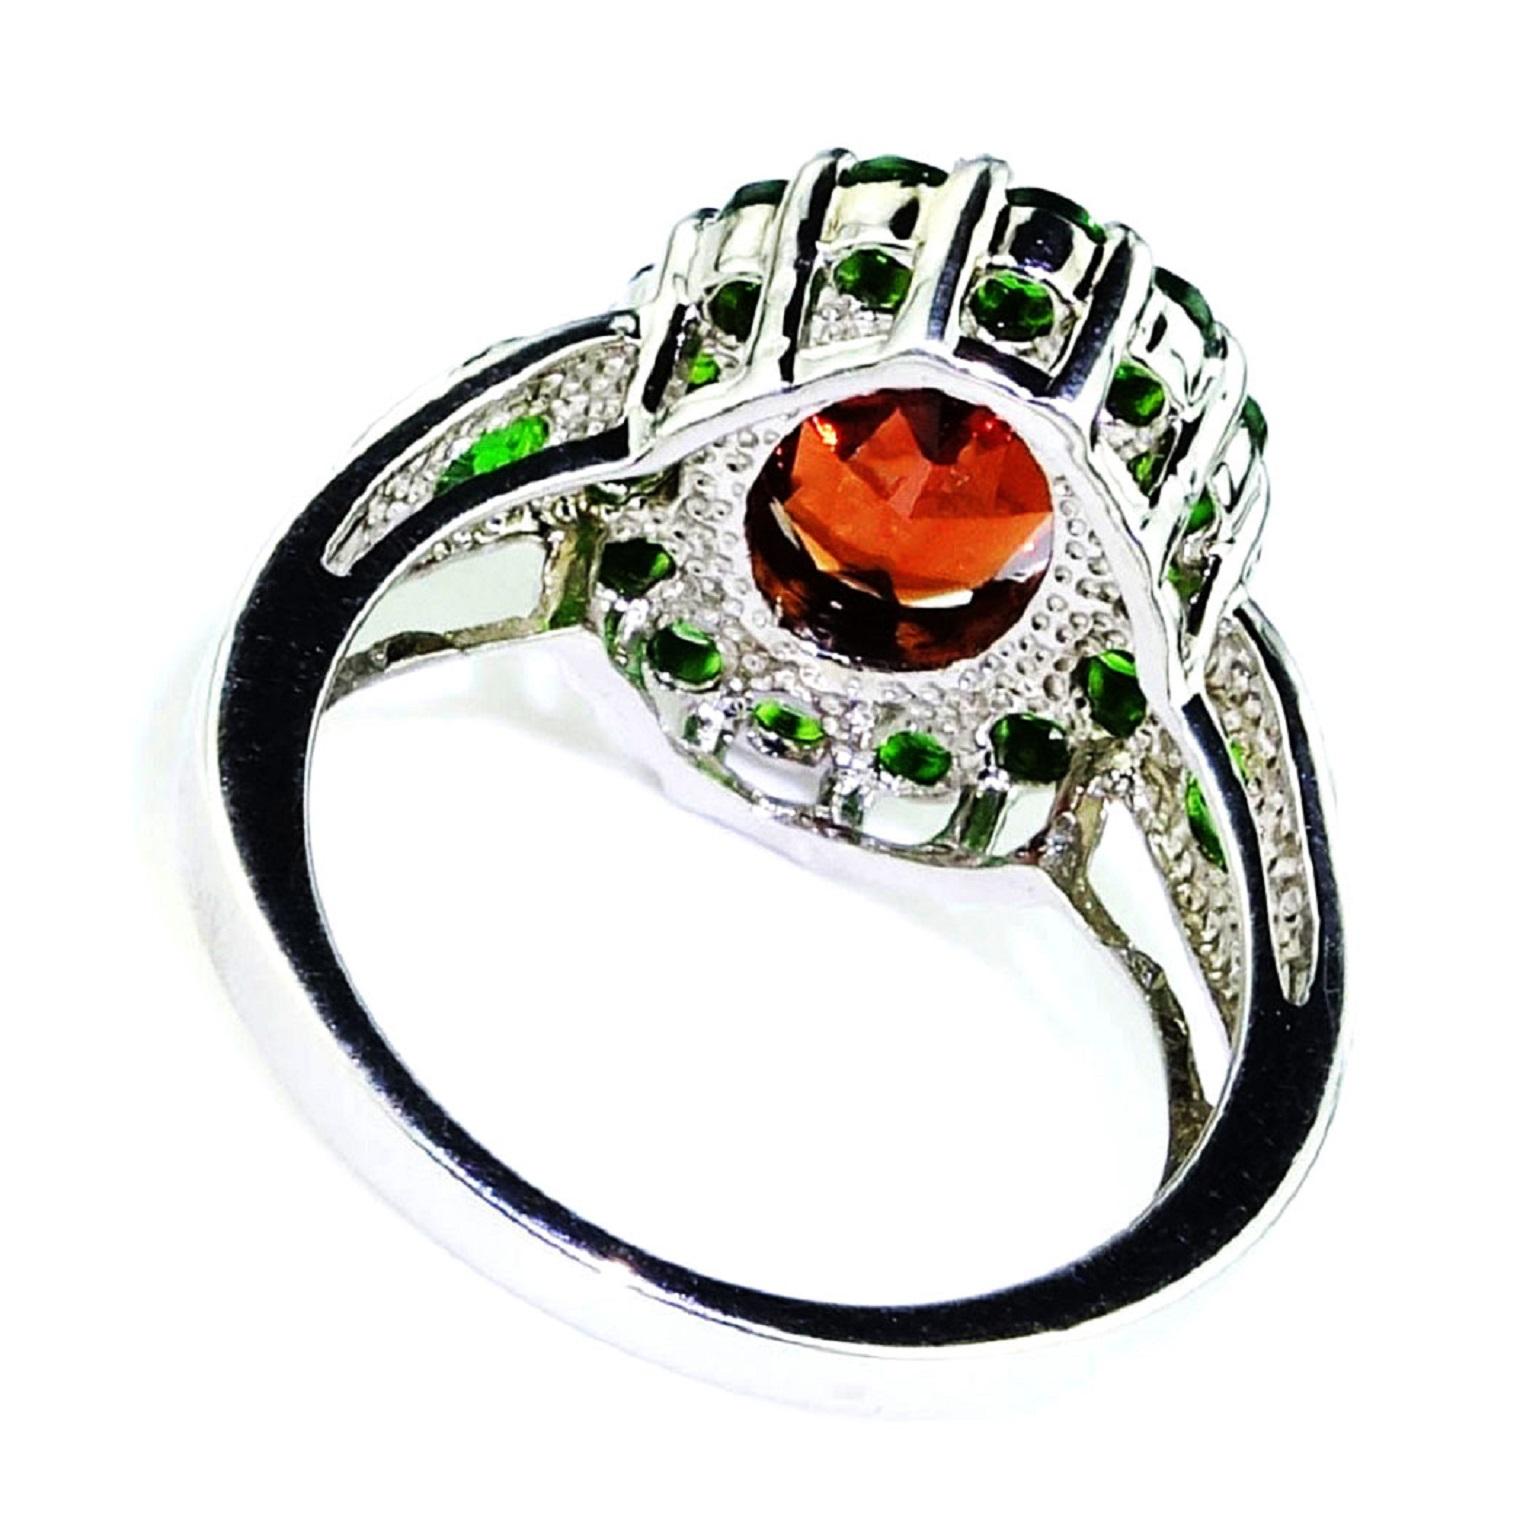 Stunning, custom made Sterling Silver Ring set with oval Sparkling Spessartite Garnet, 2.87ct, surrounded by round bright green Chrome Diopside. There are two more Chrome Diopside in the ring shank. TCW 1.47. This unique ring is a great way to show